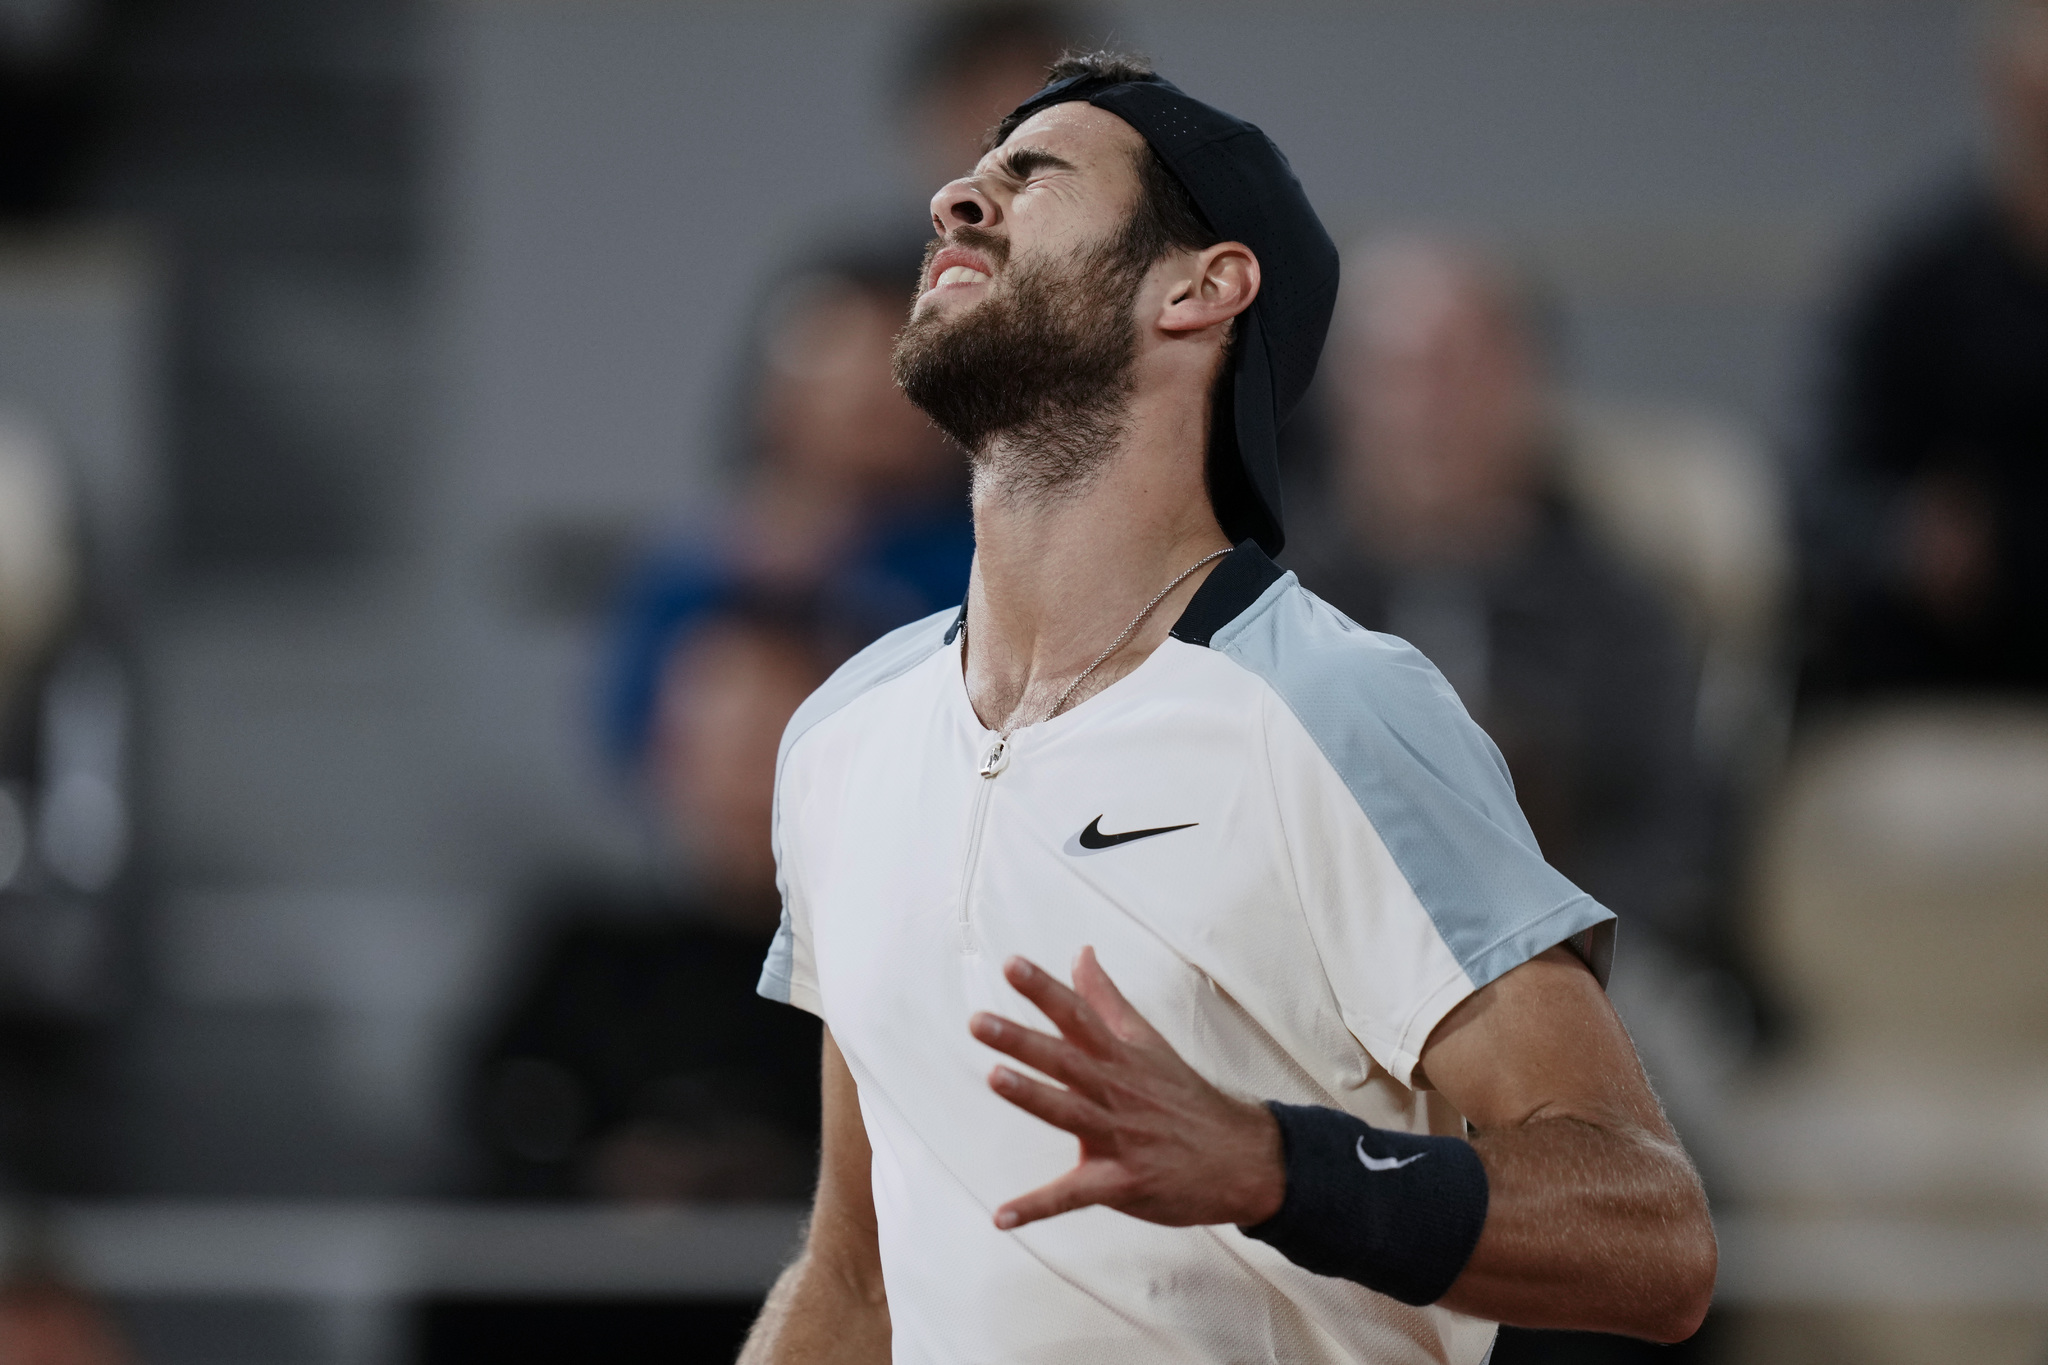 Russia's Karen  lt;HIT gt;Khachanov lt;/HIT gt; reacts after missing a shot against Spain's Carlos Alcaraz during their fourth round match at the French Open tennis tournament in Roland Garros stadium in Paris, France, Sunday, May 29, 2022. (AP Photo/Thibault Camus)